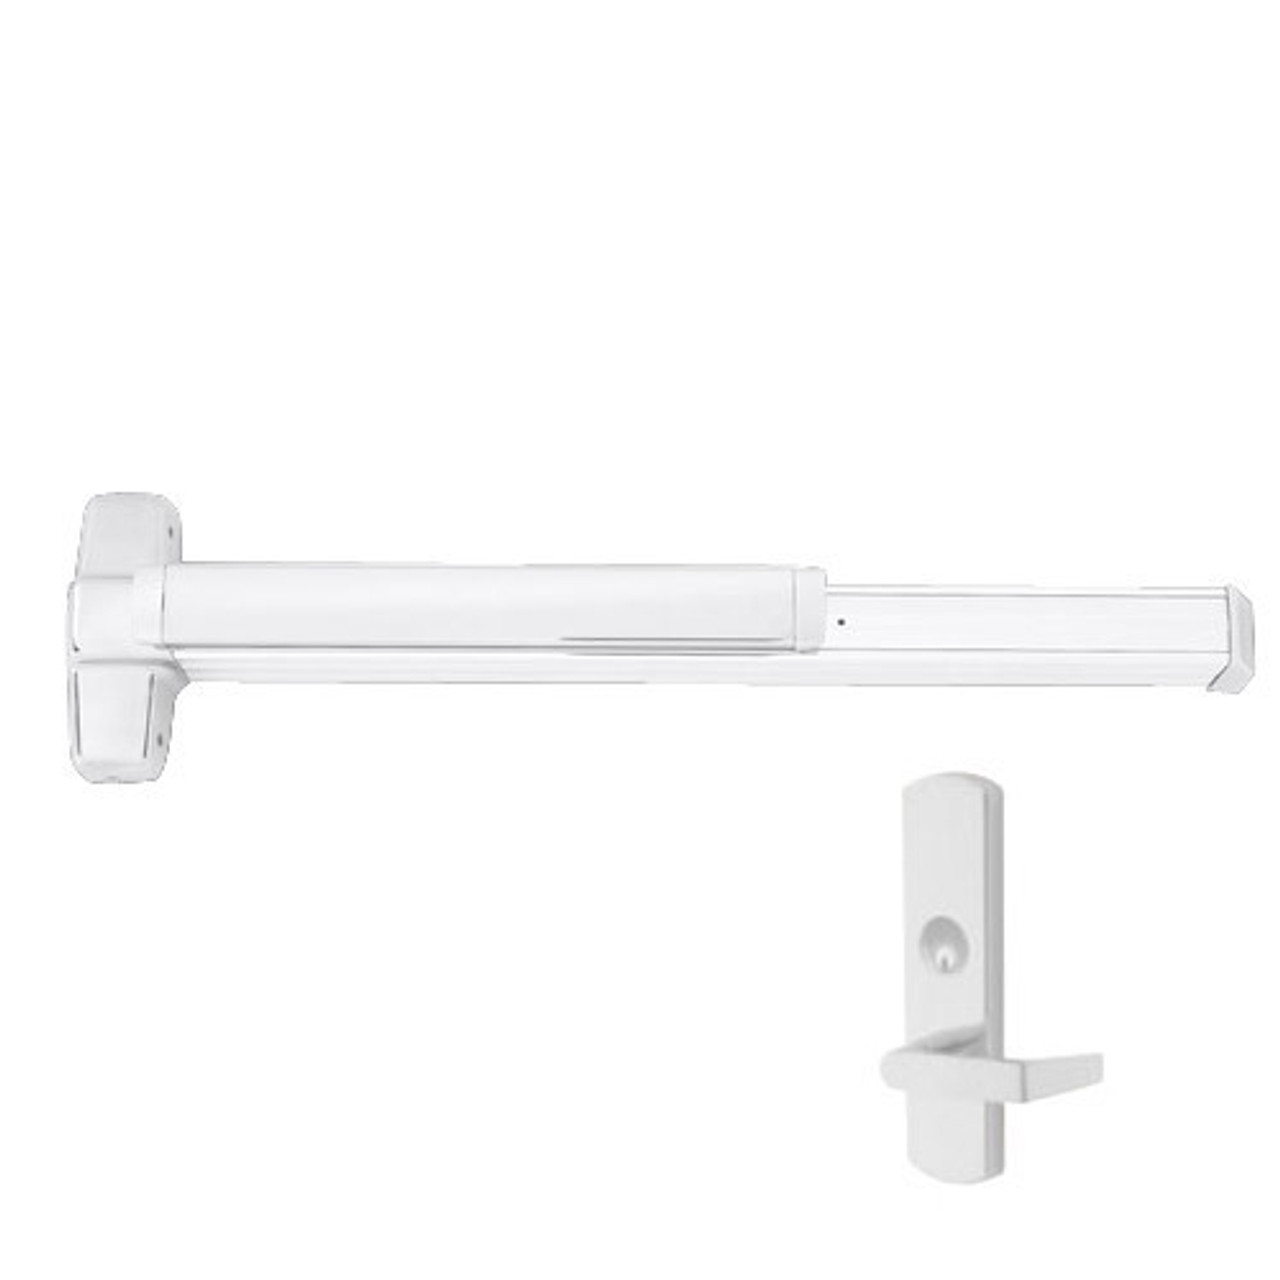 EL9847WDC-L-US26-3-LHR Von Duprin Exit Device with Electric Latch Retraction in Bright Chrome